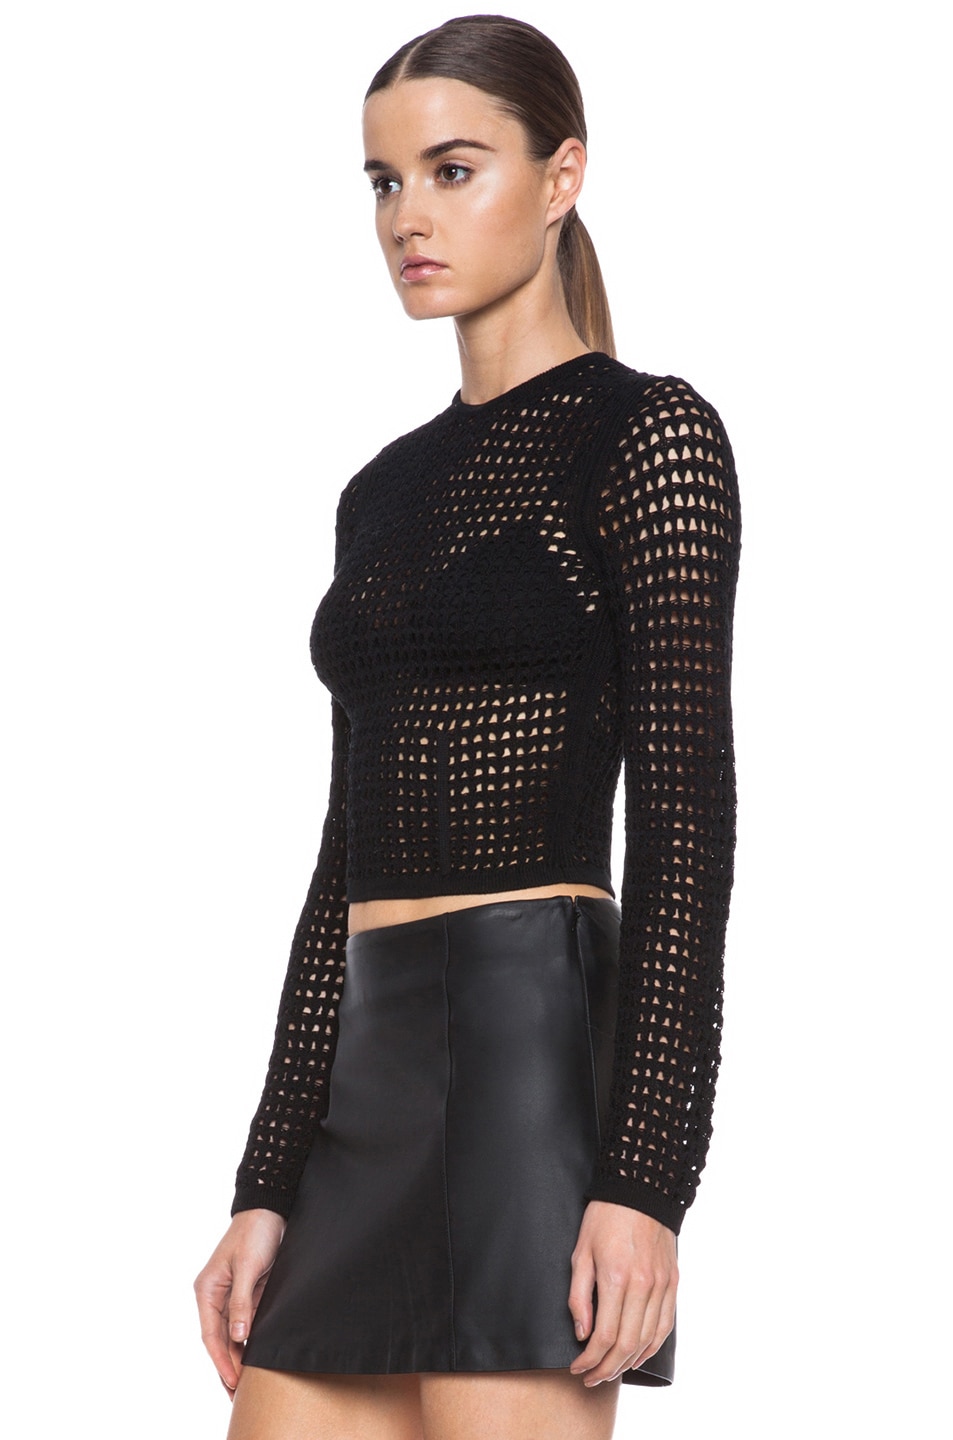 Alexander Wang Fitted Crochet Knit Pullover in Liquorice | FWRD